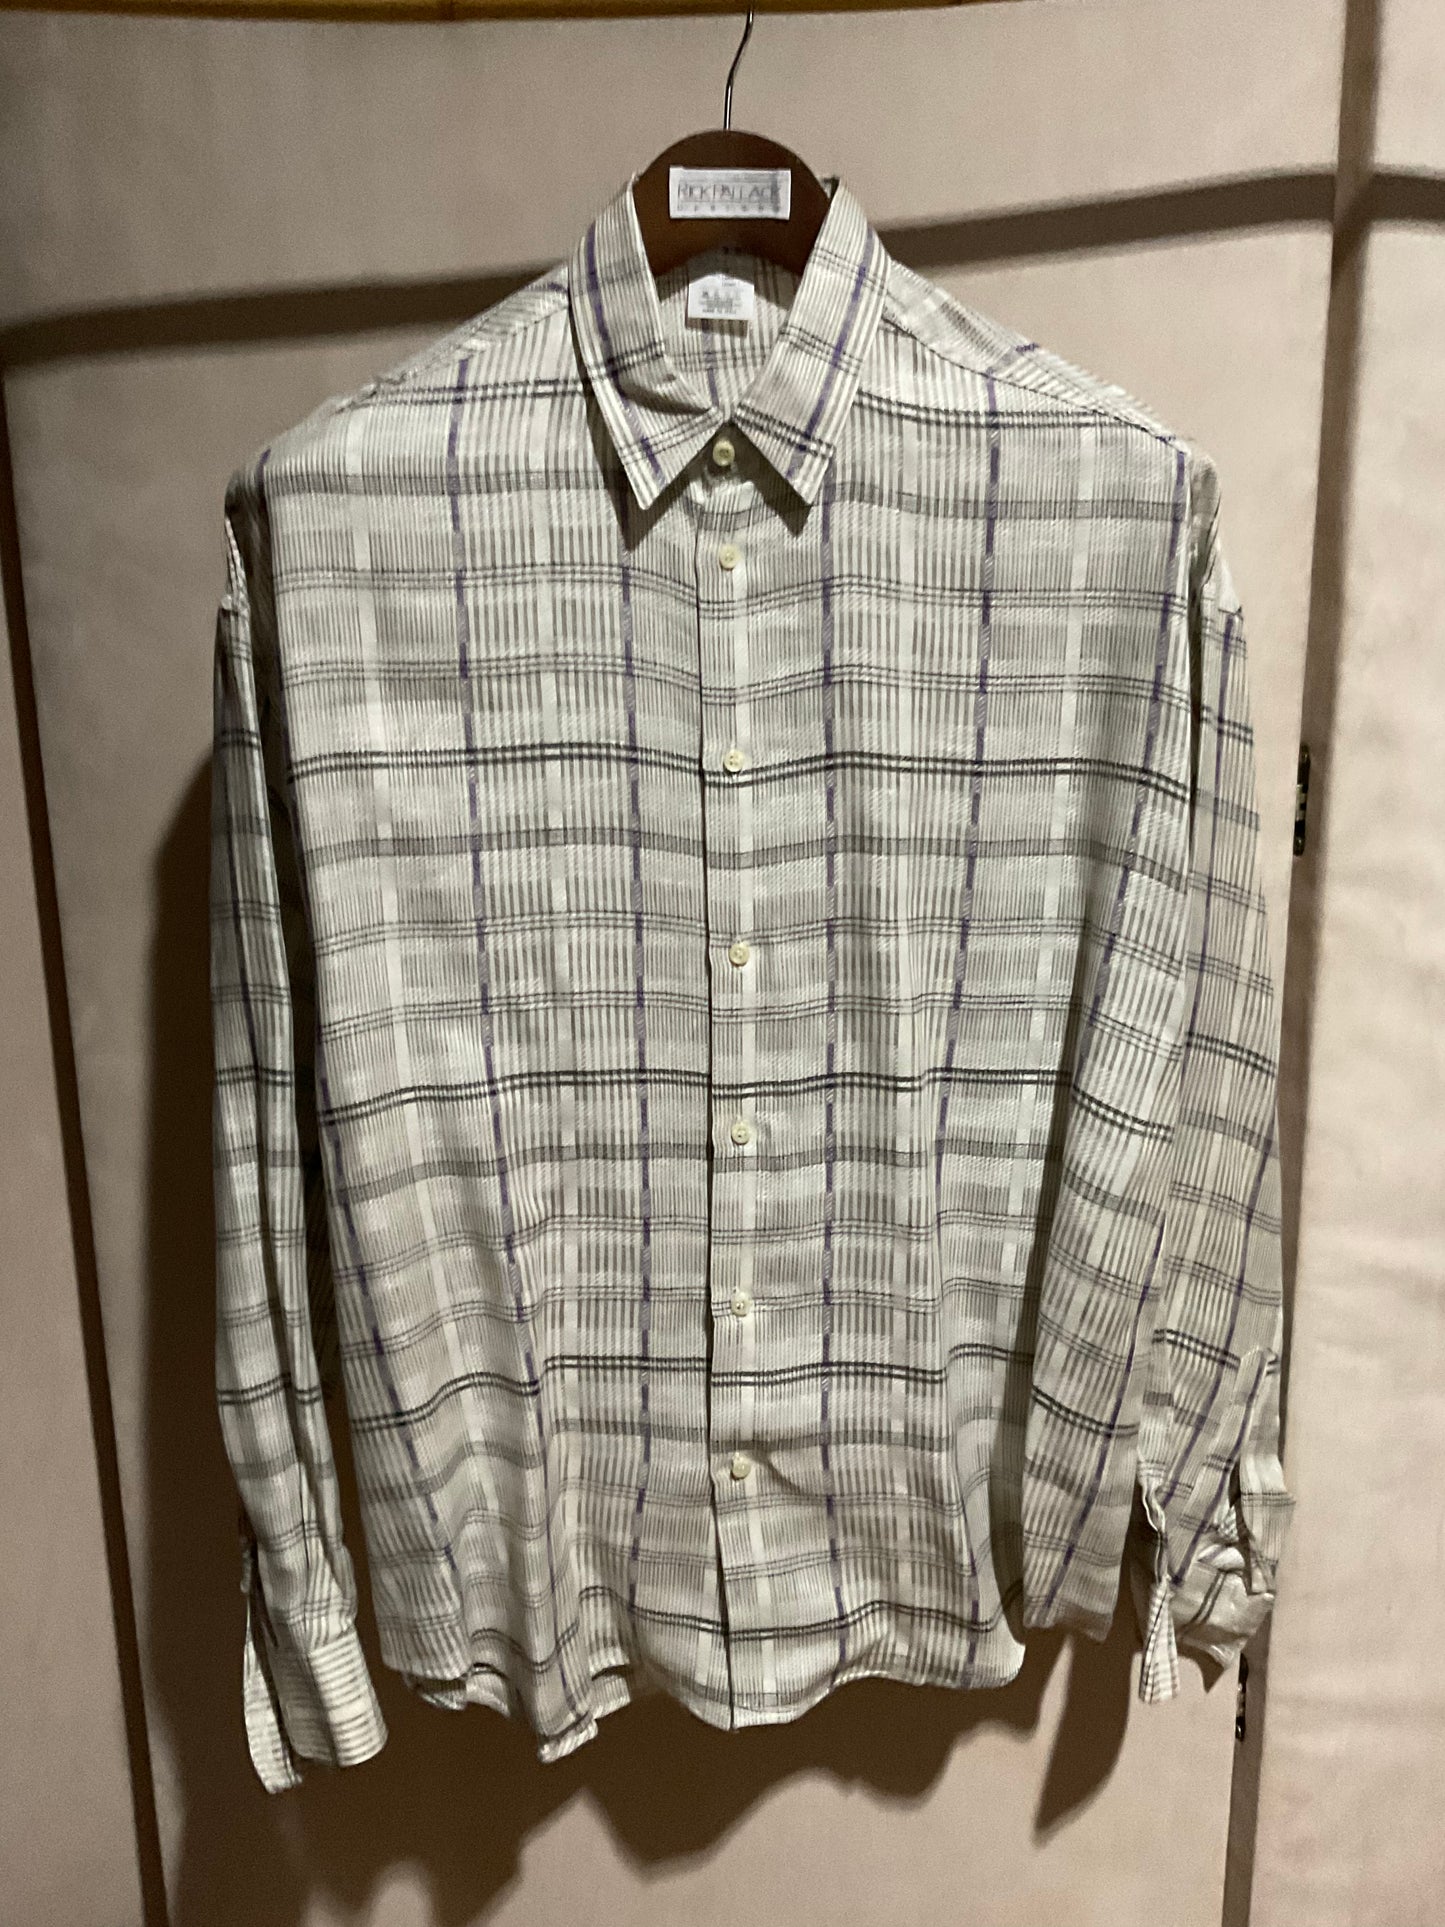 R P SPORT SHIRT / PURE LINEN / NEW / MEDIUM - LARGE / MADE IN ITALY